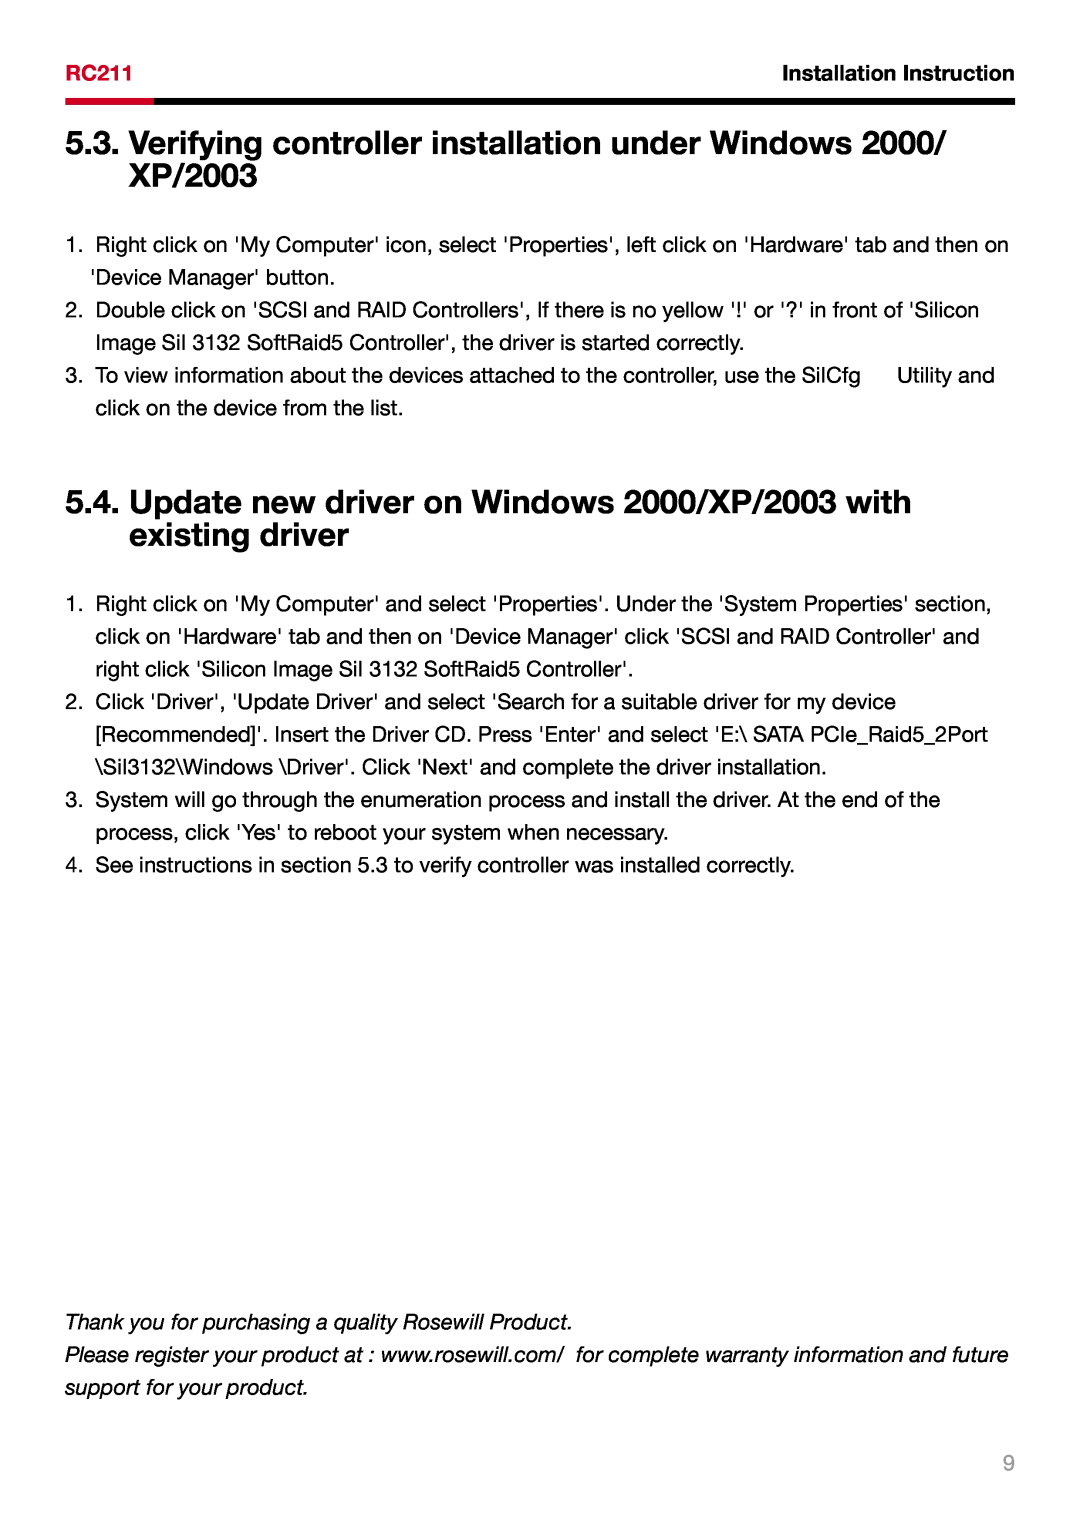 Rosewill RC211 user manual Verifying controller installation under Windows 2000/ XP/2003, Installation Instruction 